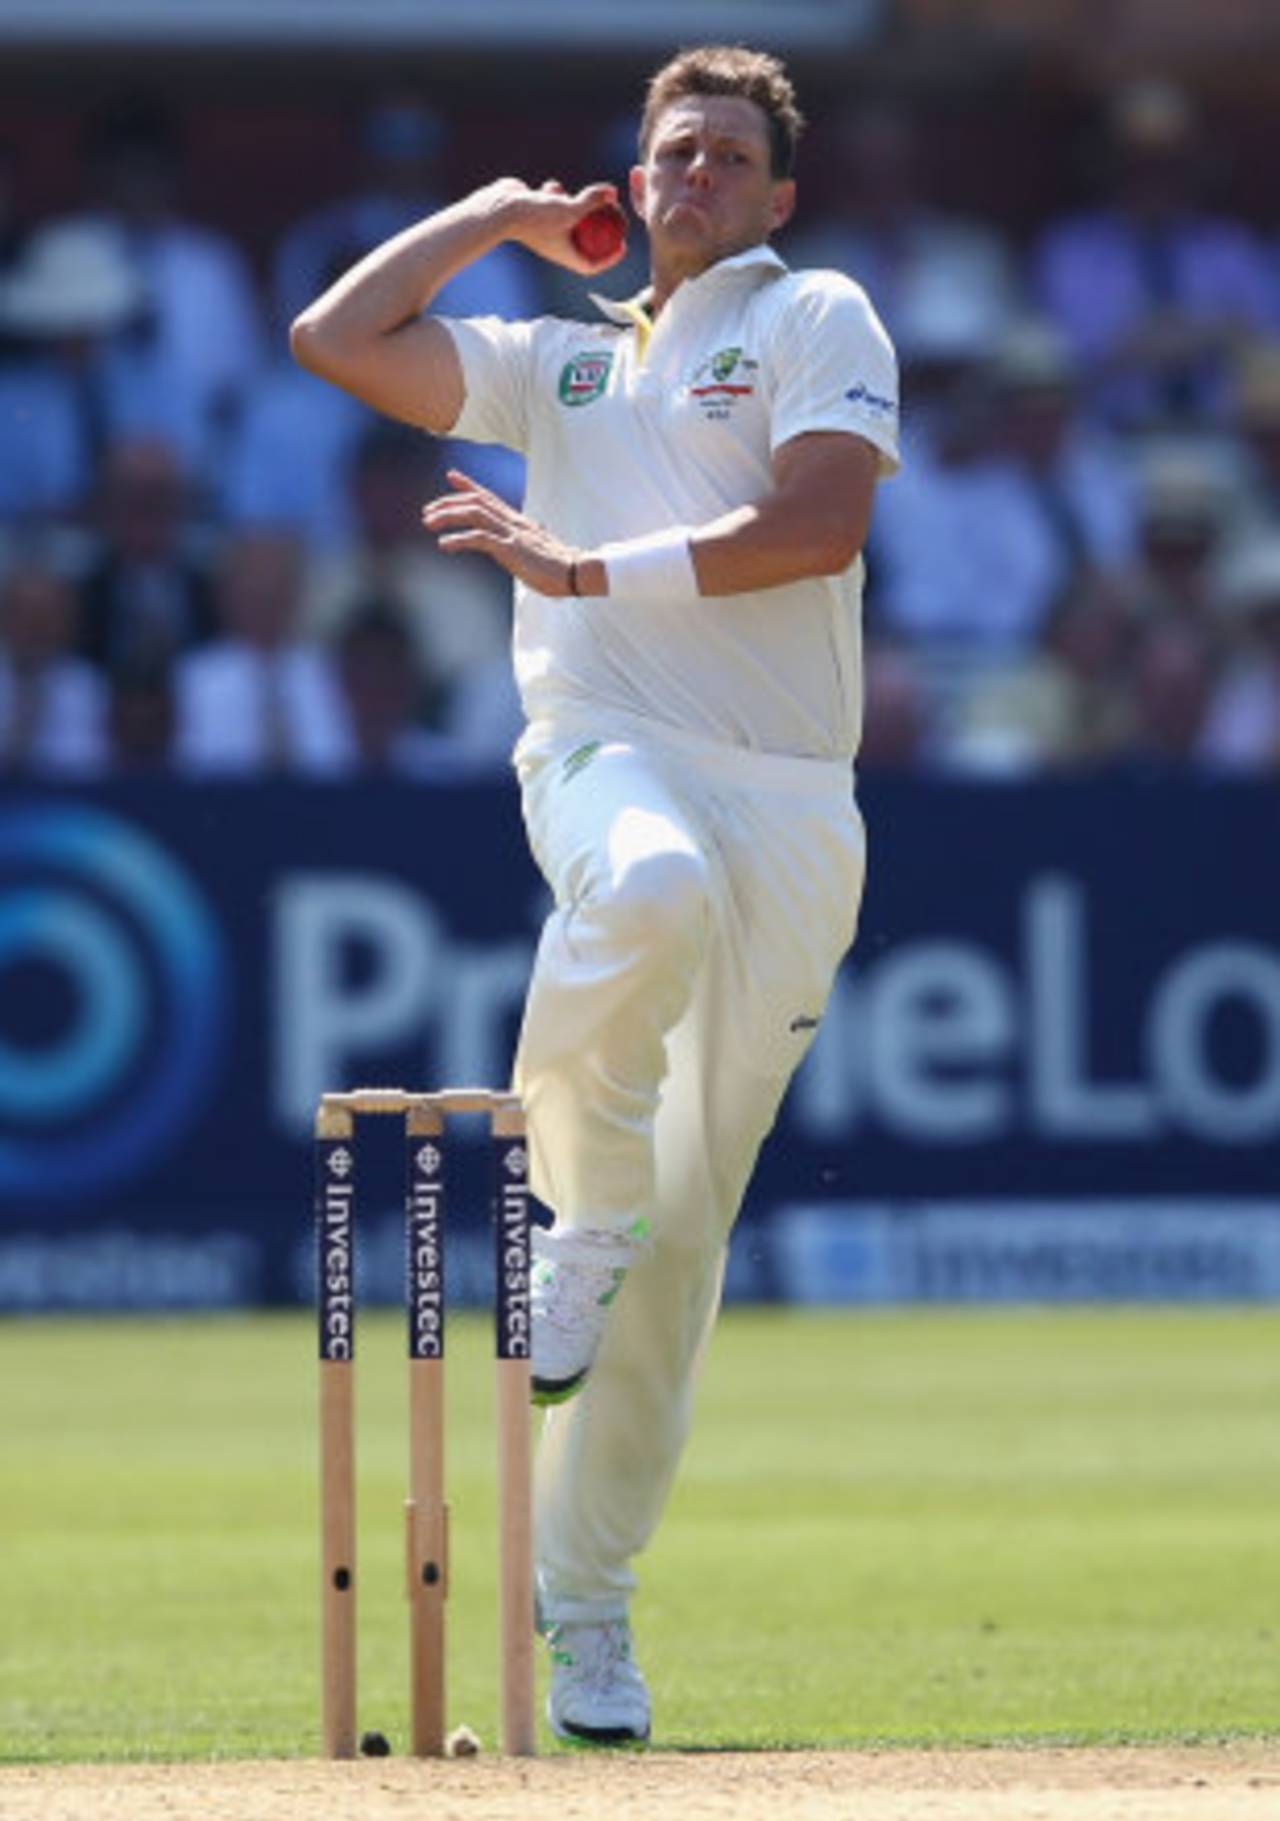 It was a tough day for James Pattinson, England v Australia, 2nd Investec Test, Lord's, 1st day, July 18, 2013